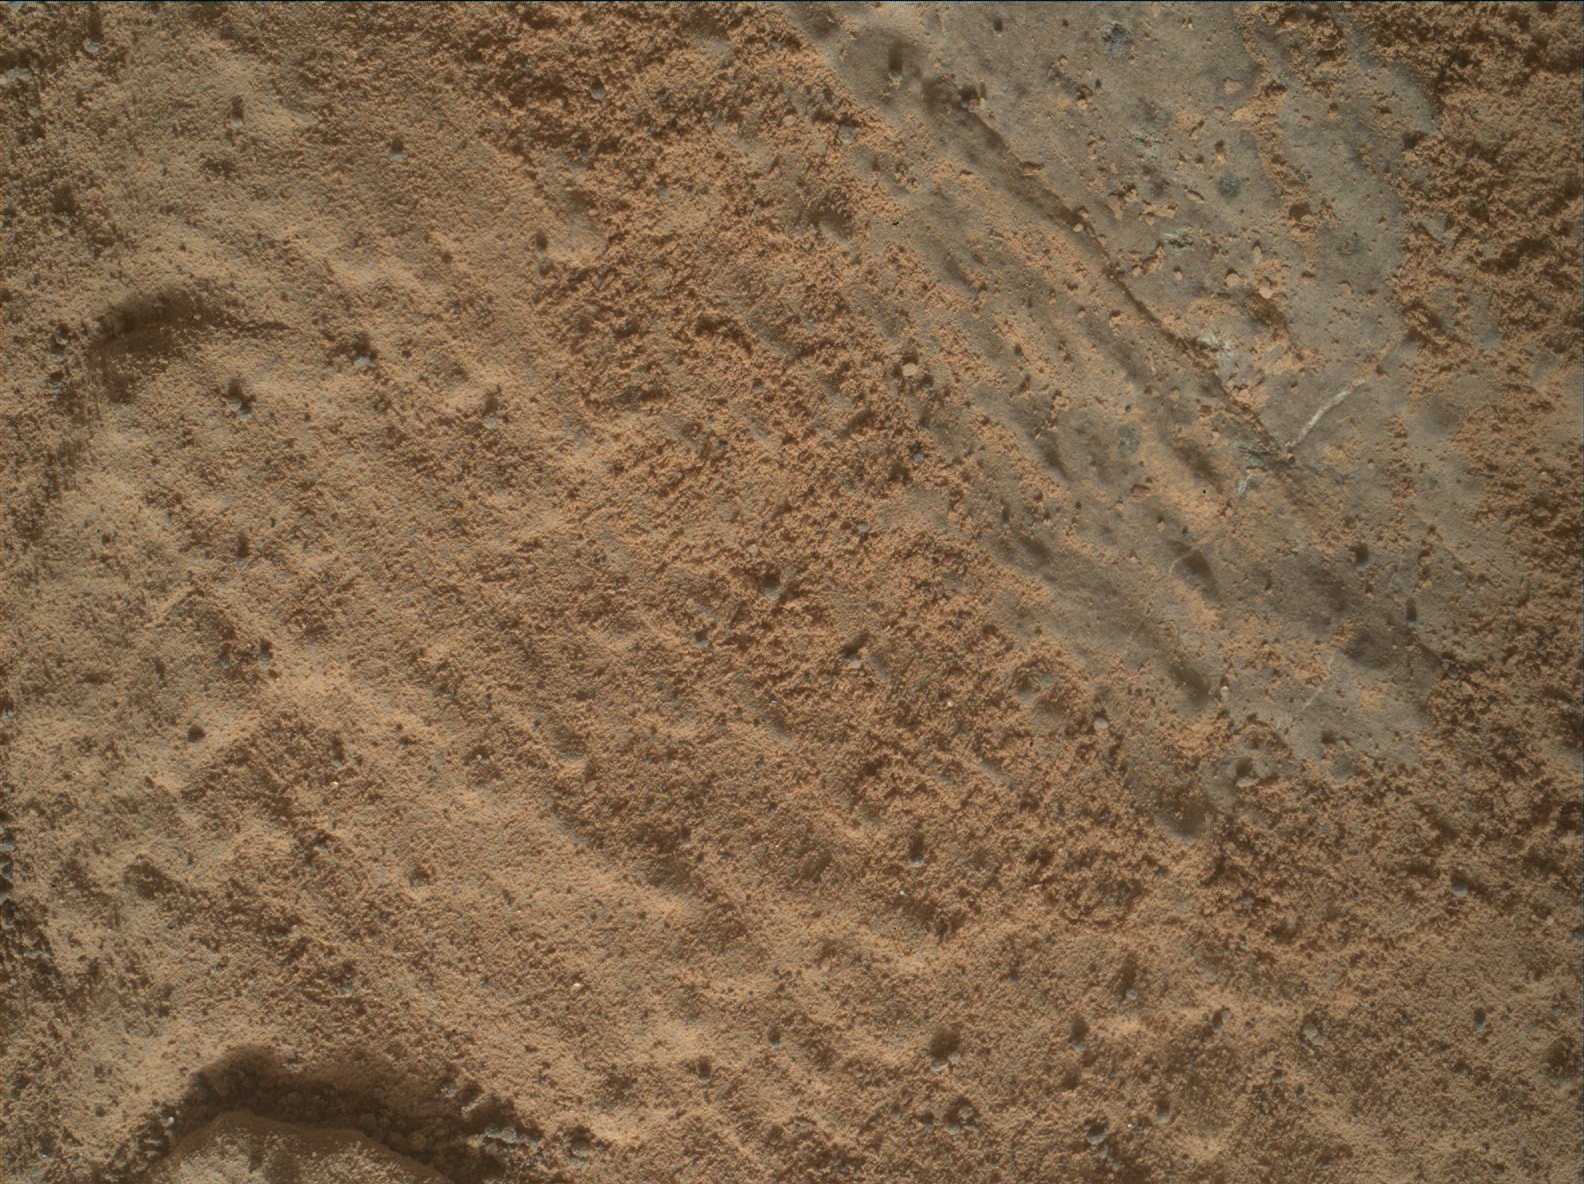 Nasa's Mars rover Curiosity acquired this image using its Mars Hand Lens Imager (MAHLI) on Sol 2657